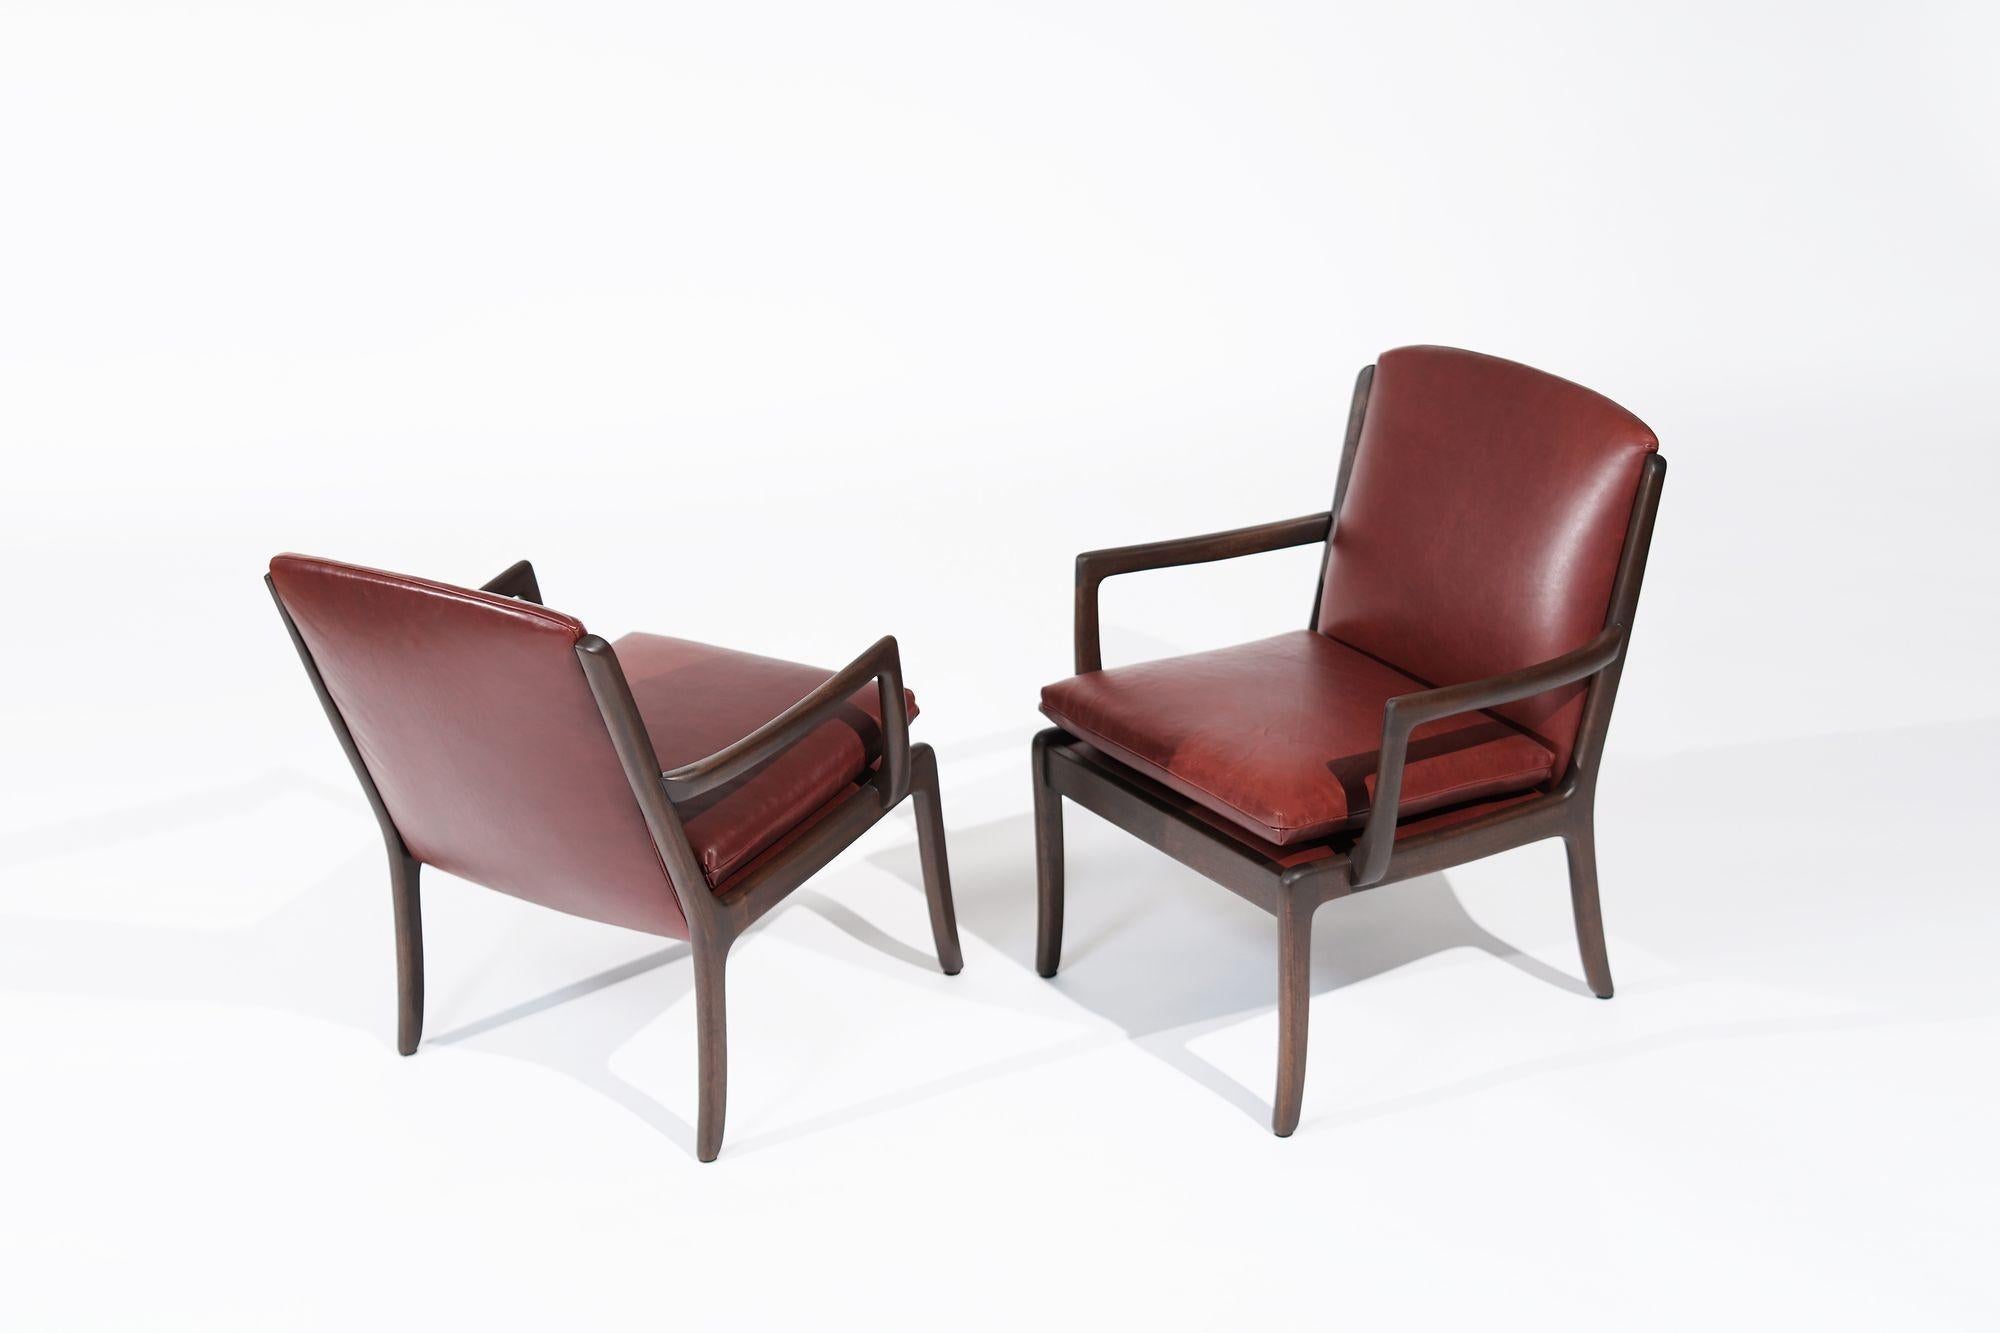 Set of Lounge Chairs by Ole Wanscher in Sangria Leather, Denmark, C. 1960s In Excellent Condition For Sale In Westport, CT